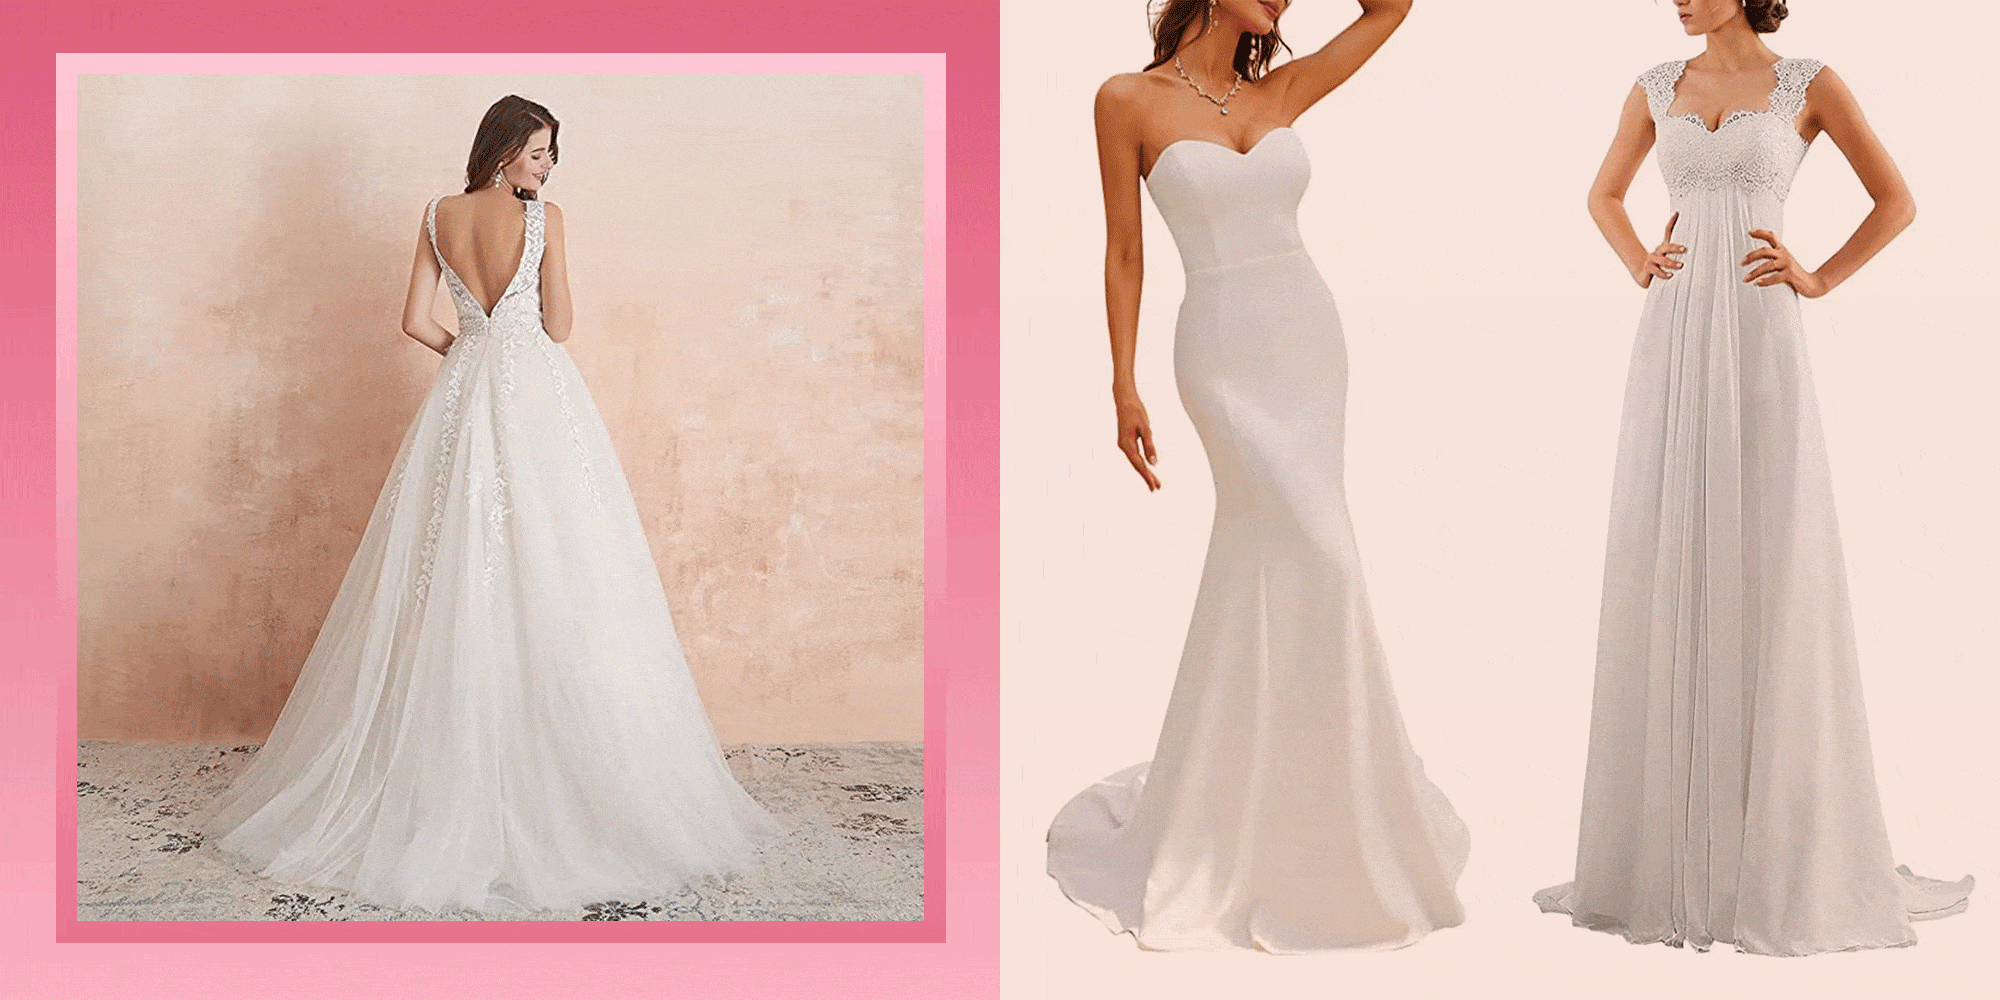 The 10 Best Places to Buy Wedding Dresses Online